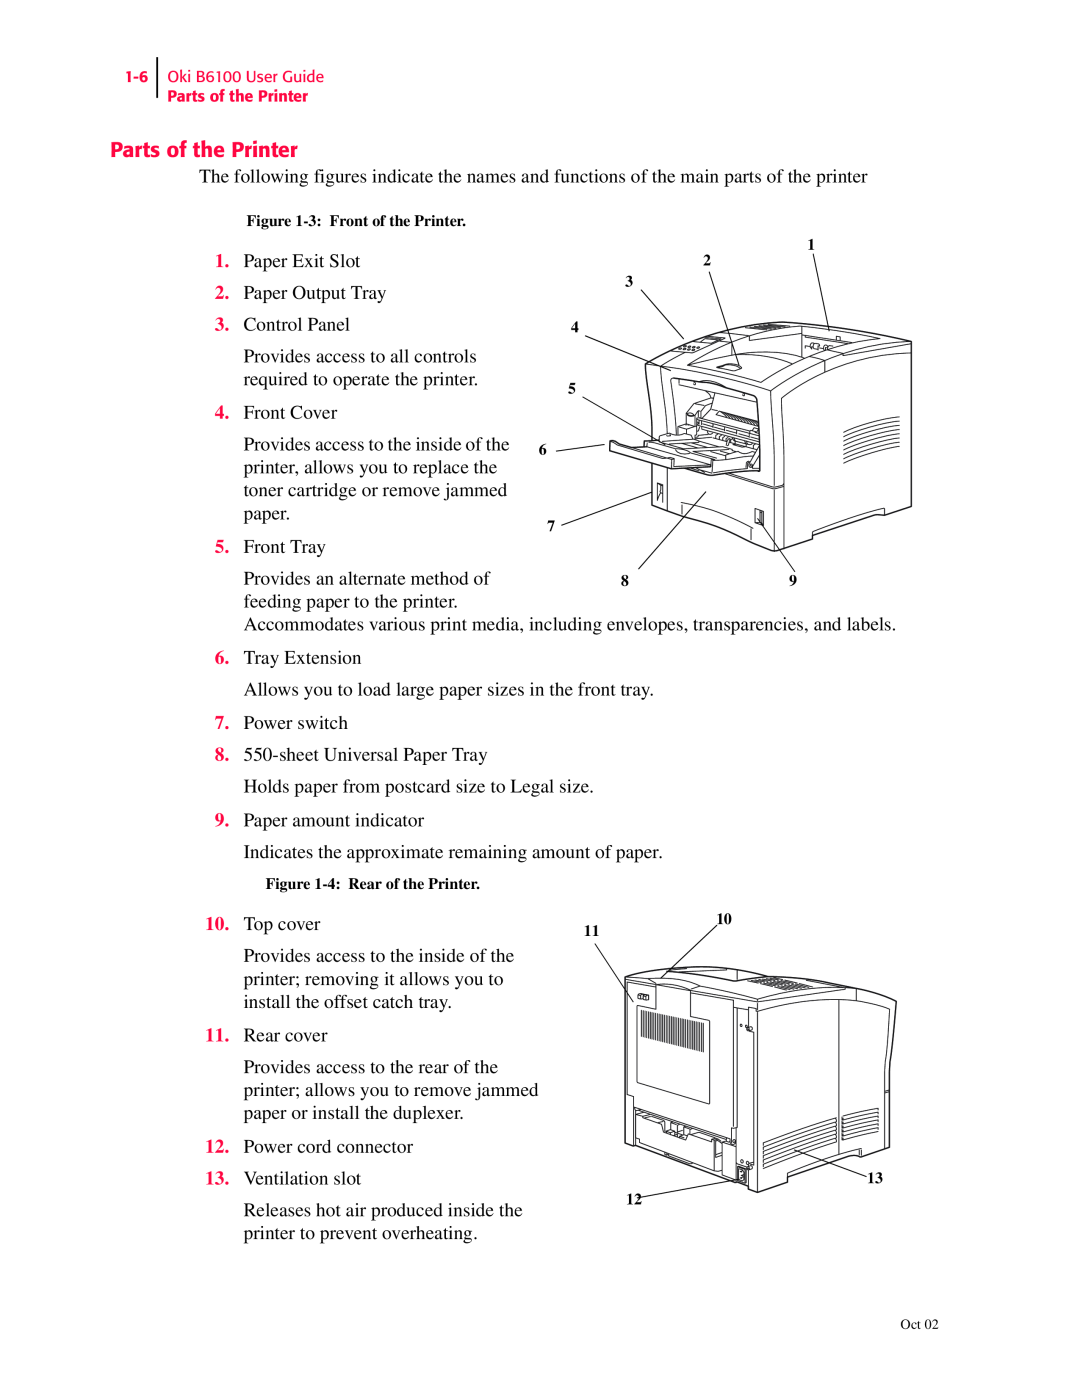 Oki 6100 Parts of the Printer, Provides an alternate method of, feeding paper to the printer, Top cover, Ventilation slot 